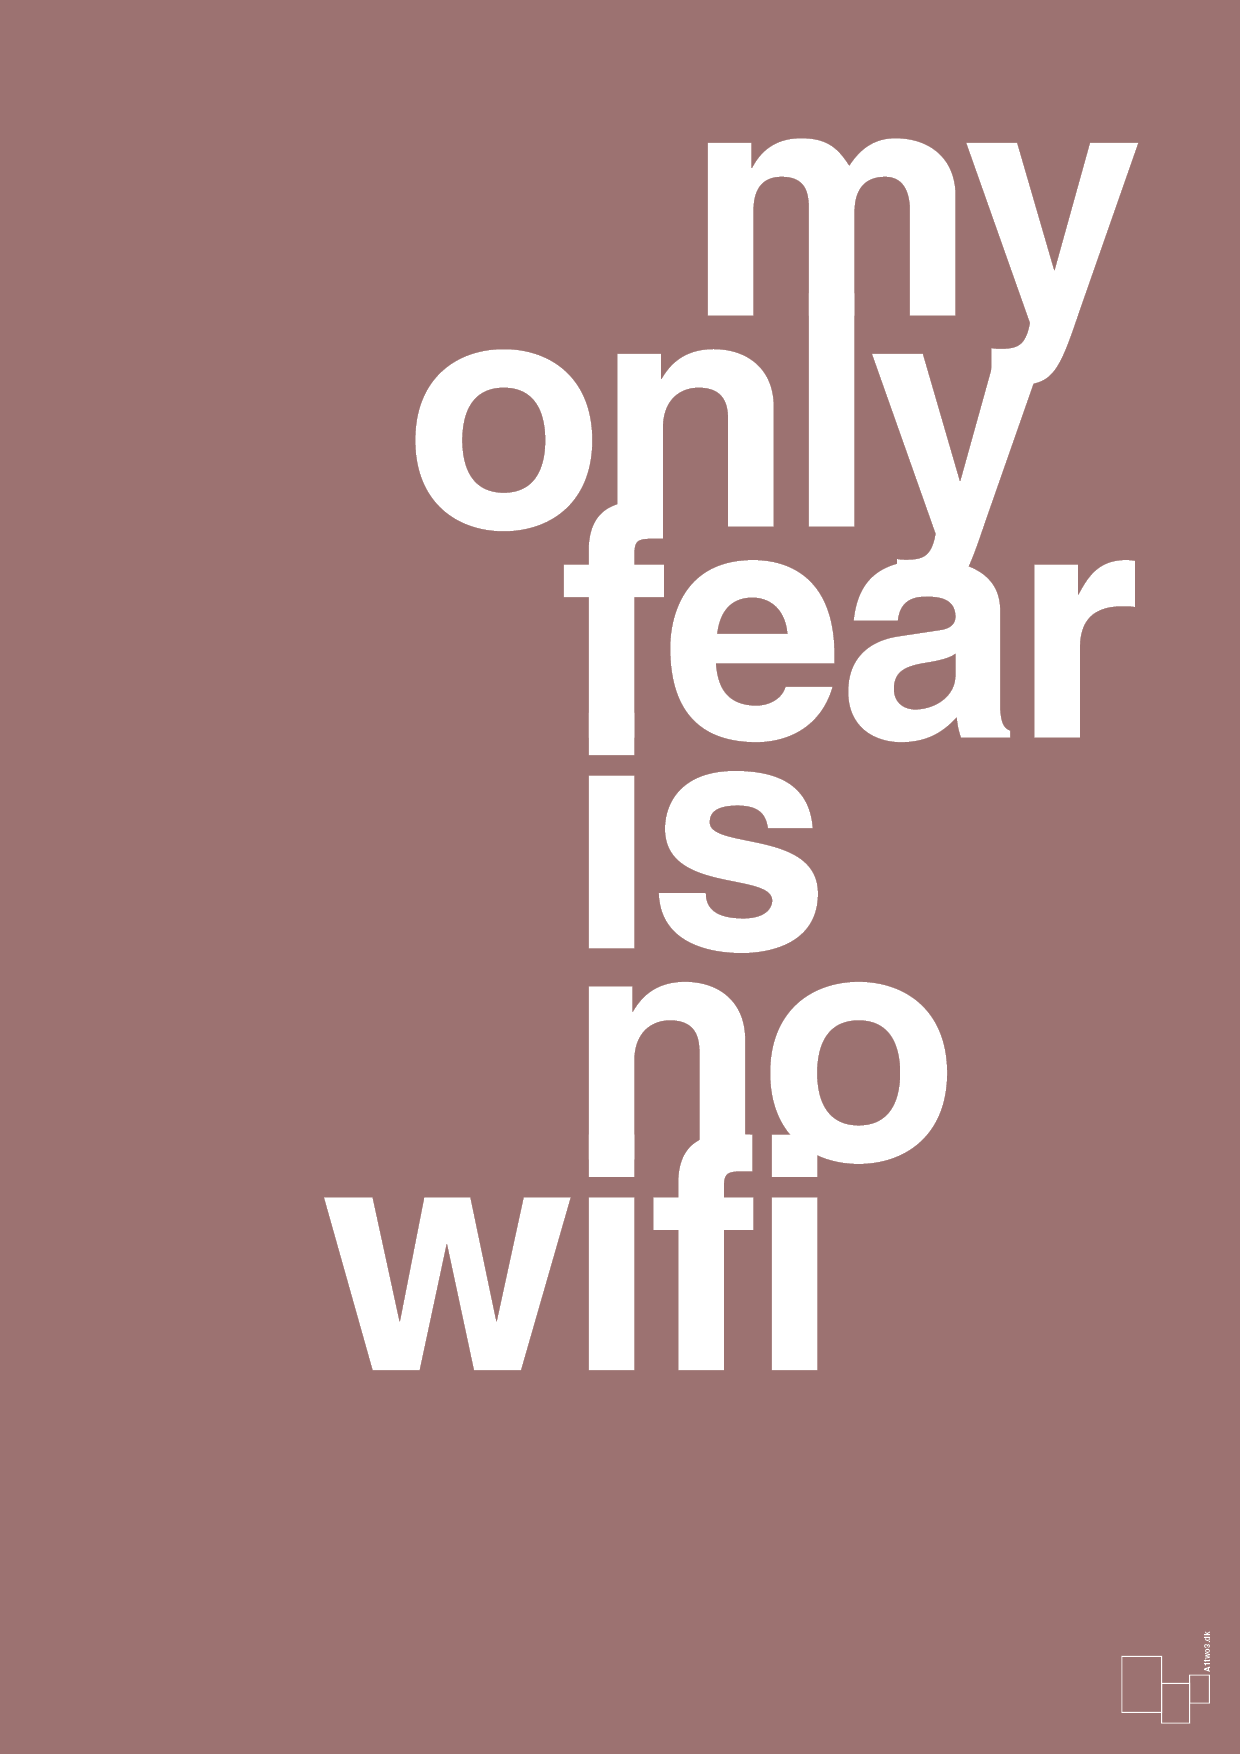 my only fear is no wifi - Plakat med Sport & Fritid i Plum